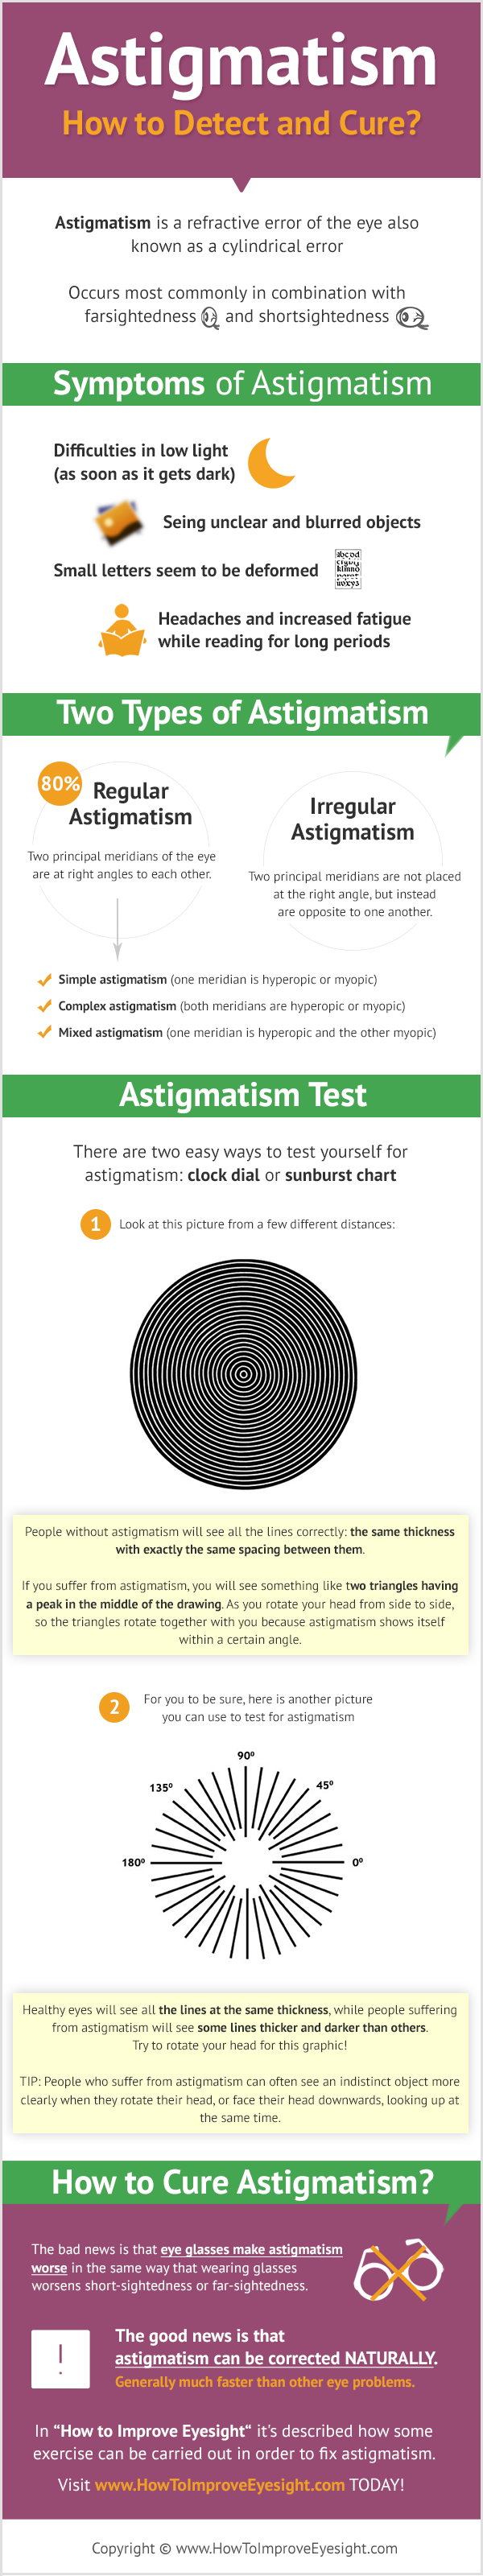 how to cure astigmatism in children naturally